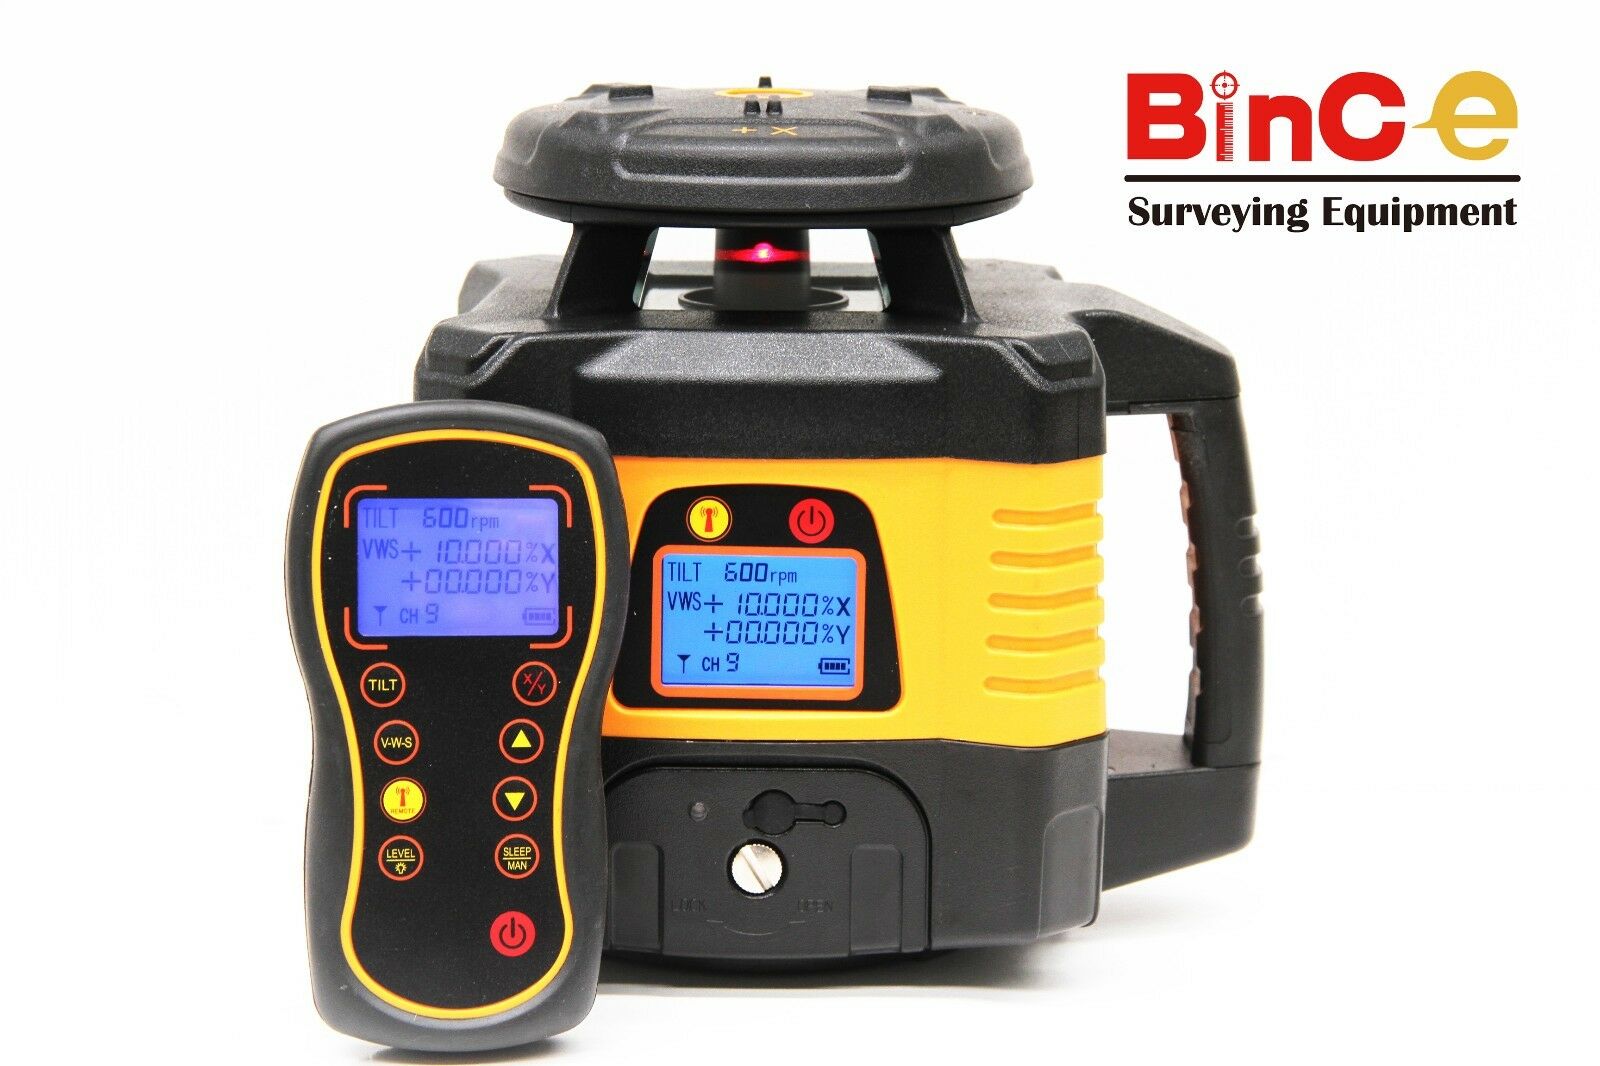 Rotary Laser Level Dual Axis Grade Leveling Rotating LCD Remote & Tripod & Staff